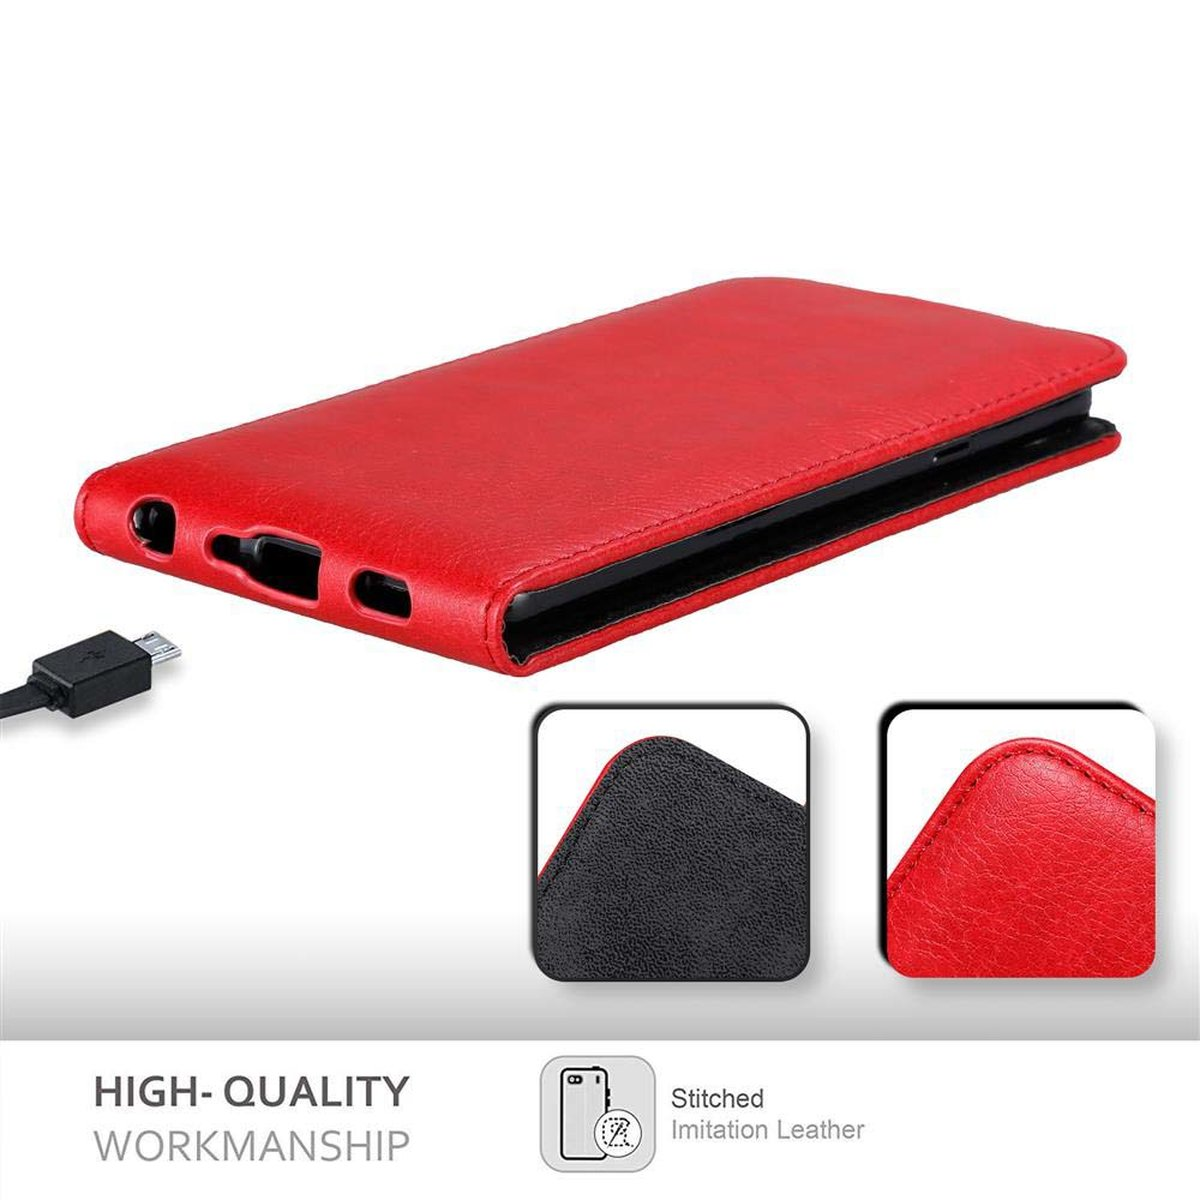 Hülle ONE, Flip Style, Flip ROT / Cover, APFEL / CADORABO FIT ThinQ im LG, G7